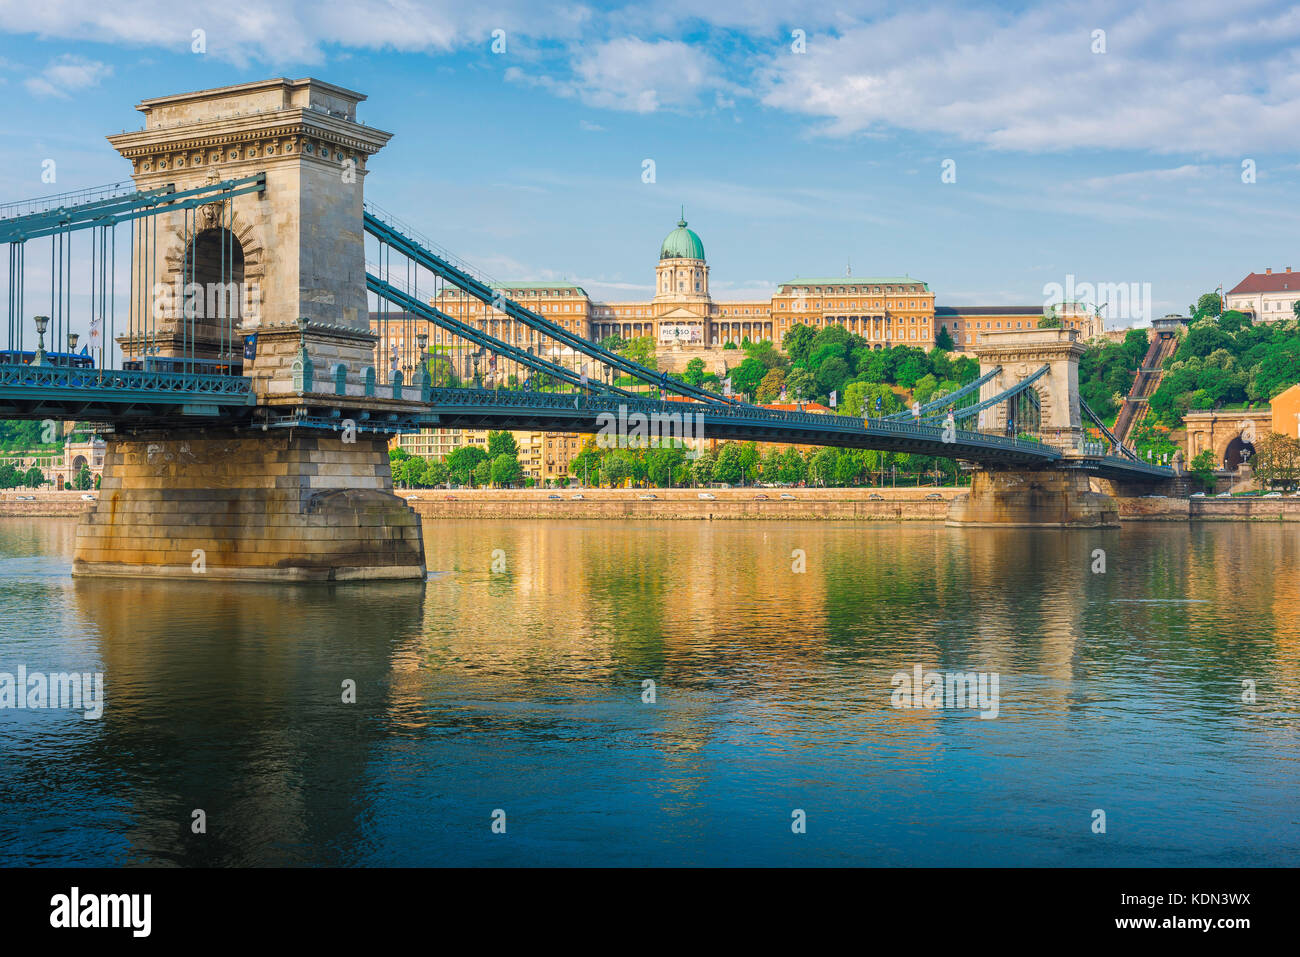 Budapest bridge Danube, view of the Lanchid Bridge spanning the Danube River with the Royal Palace in the background, Budapest, Hungary Stock Photo